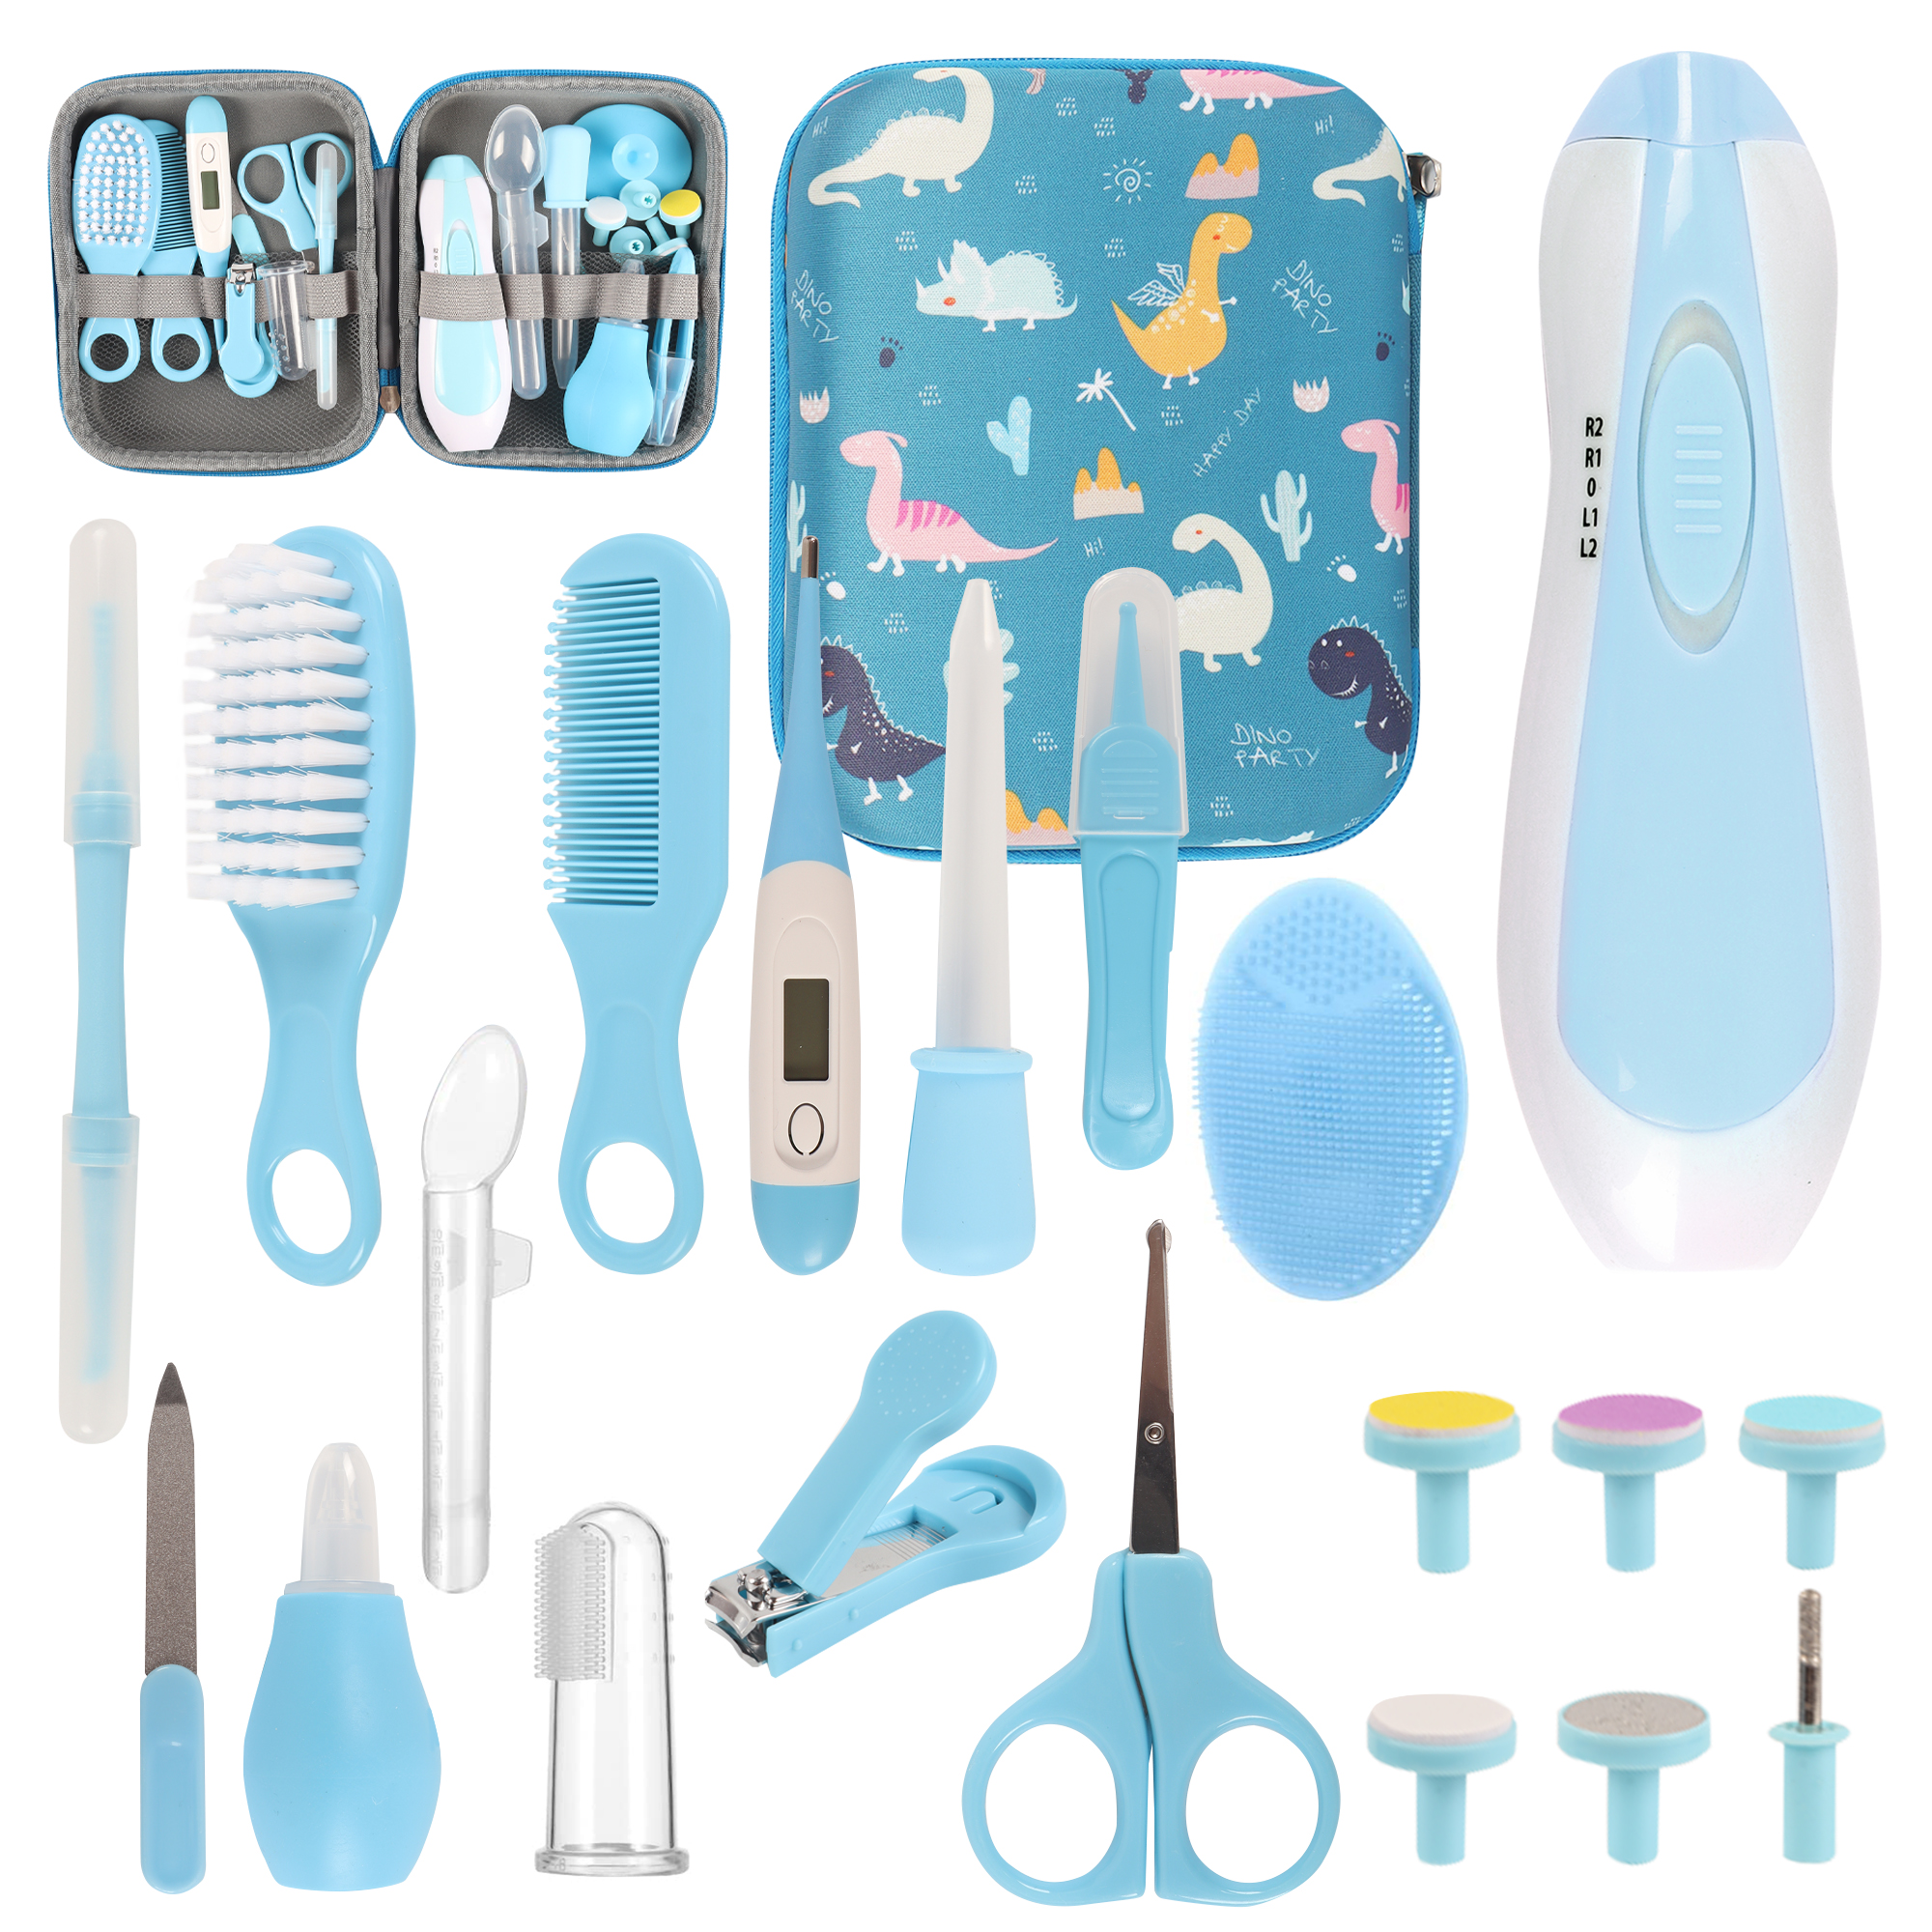 Baby Healthcare and Grooming Kit,20 in 1 Electric Safety Nail Trimmer Baby Nursery Set Newborn Nursery Health Care Set with Hair Brush Comb for Infant Toddlers Kids Baby Shower Gifts-Blue - image 1 of 7